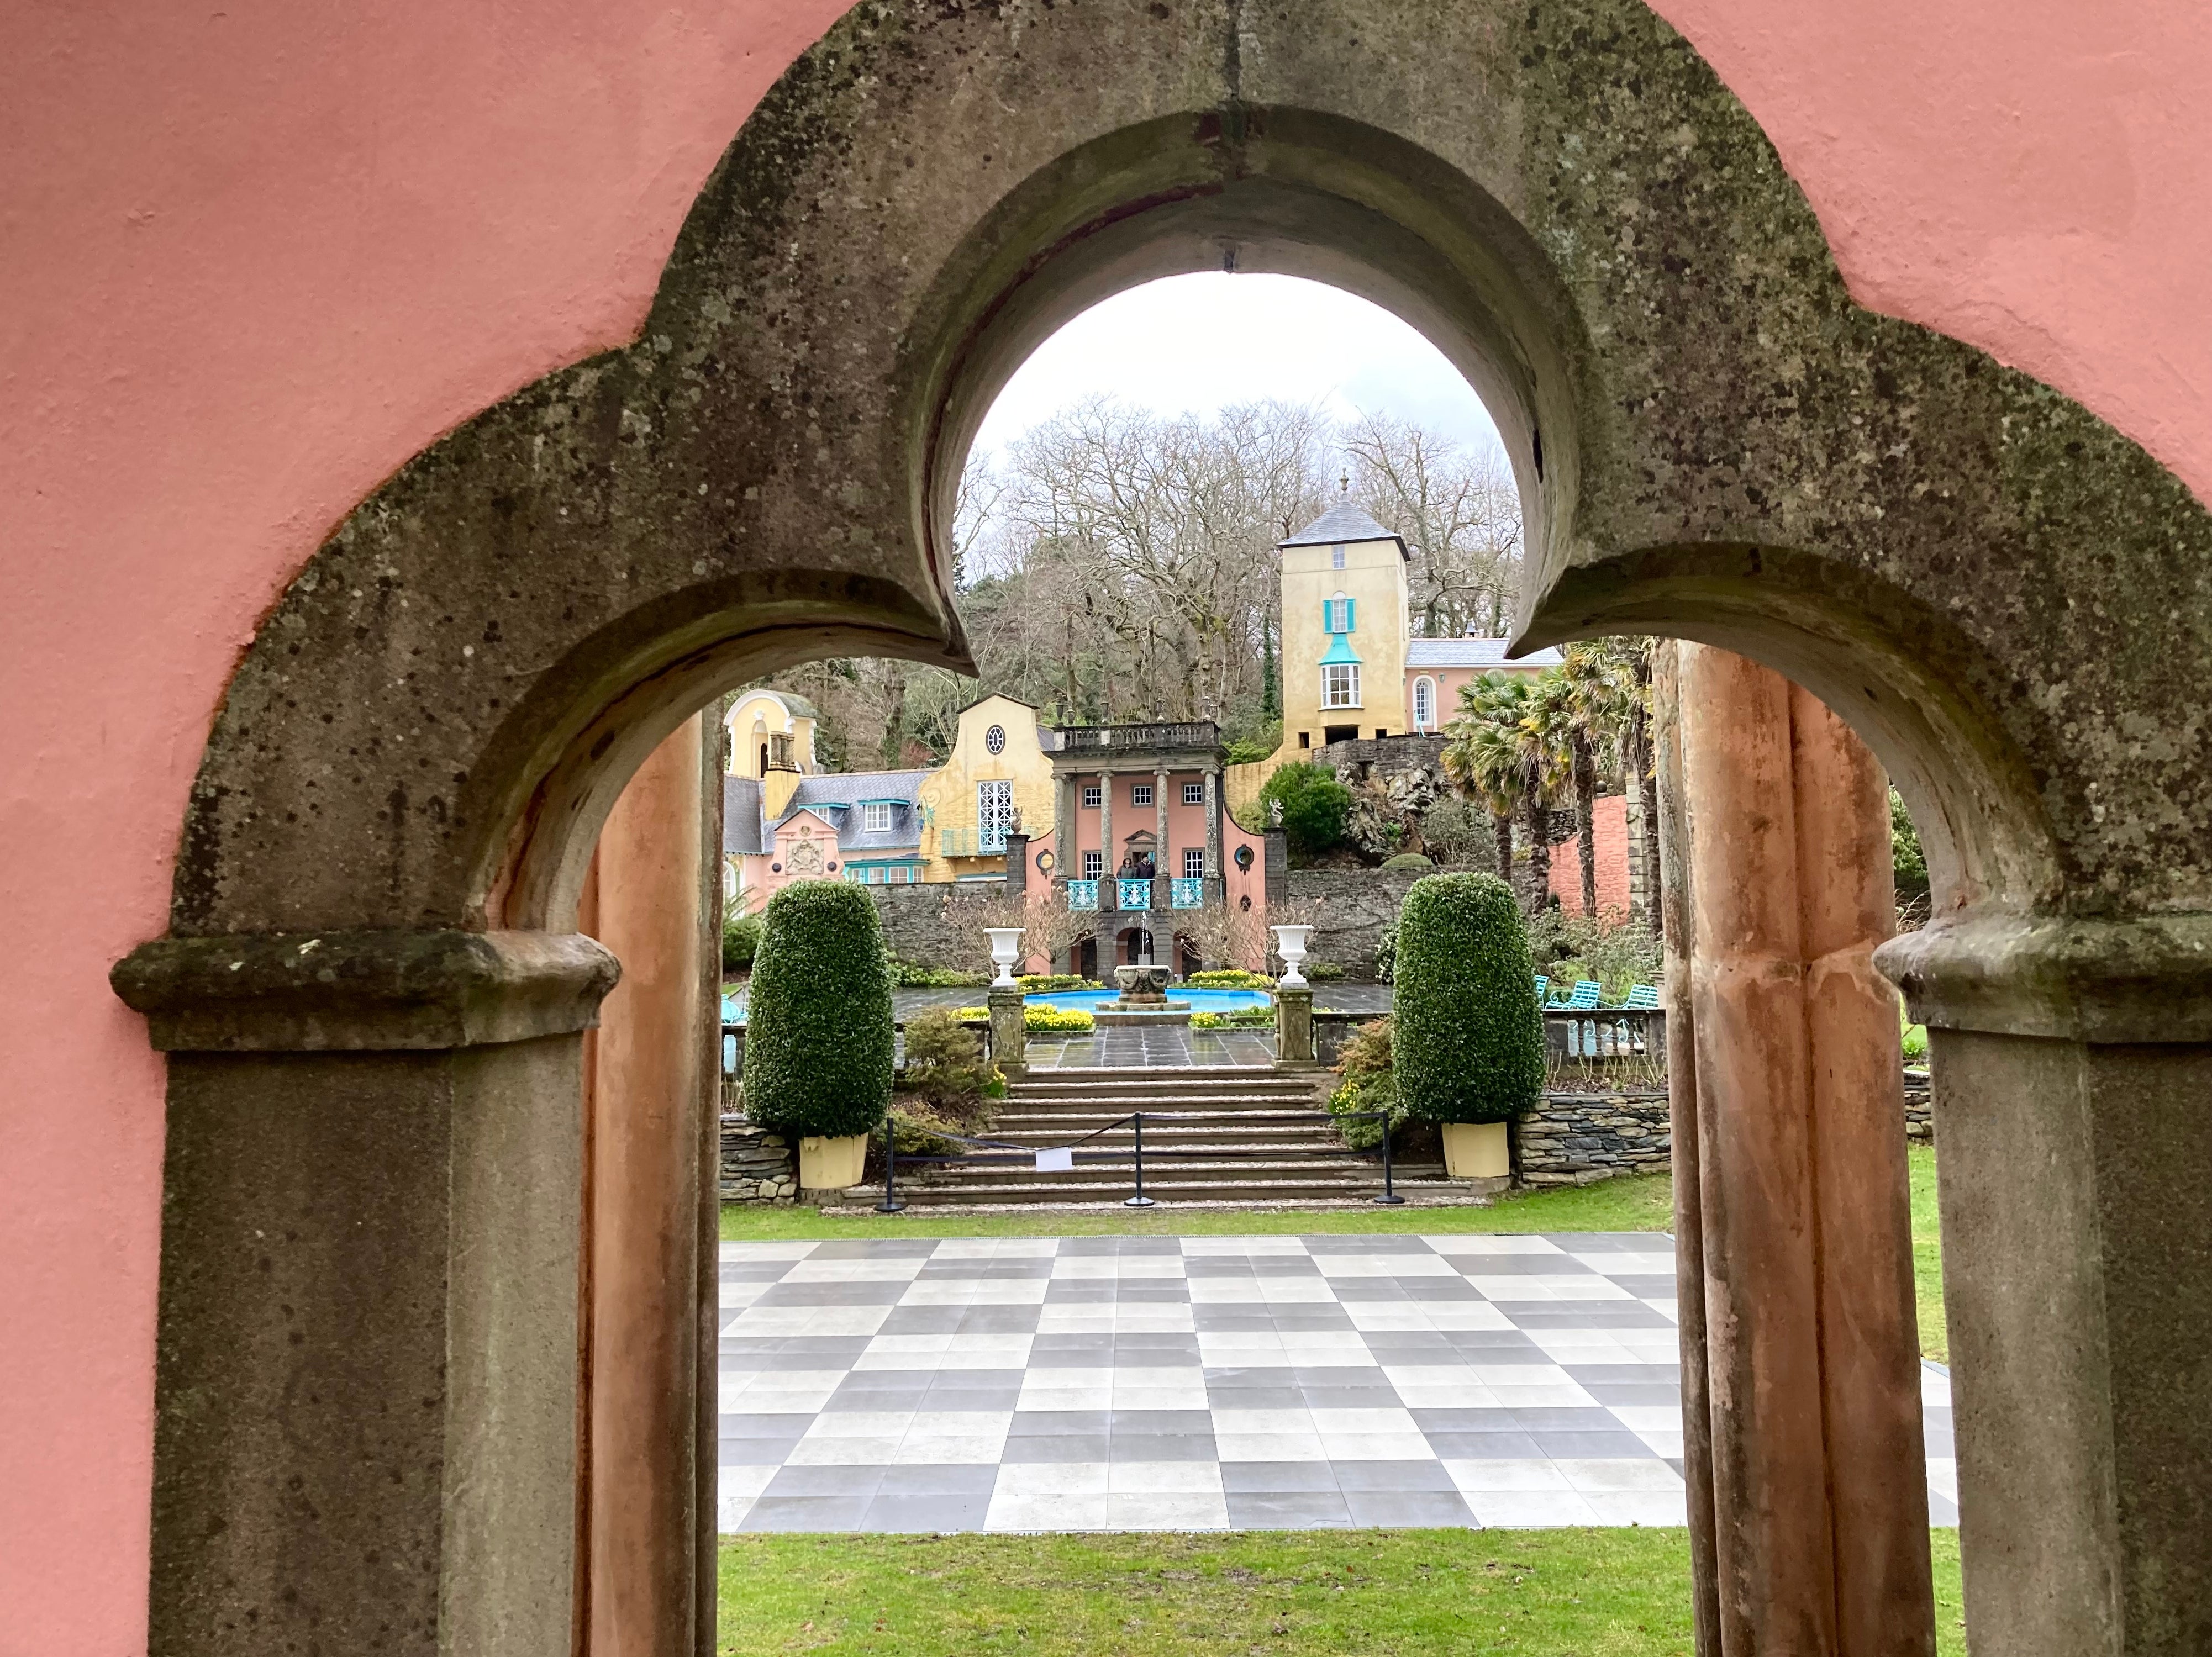 Portmeirion was inspired by architecture found in the Mediterranean